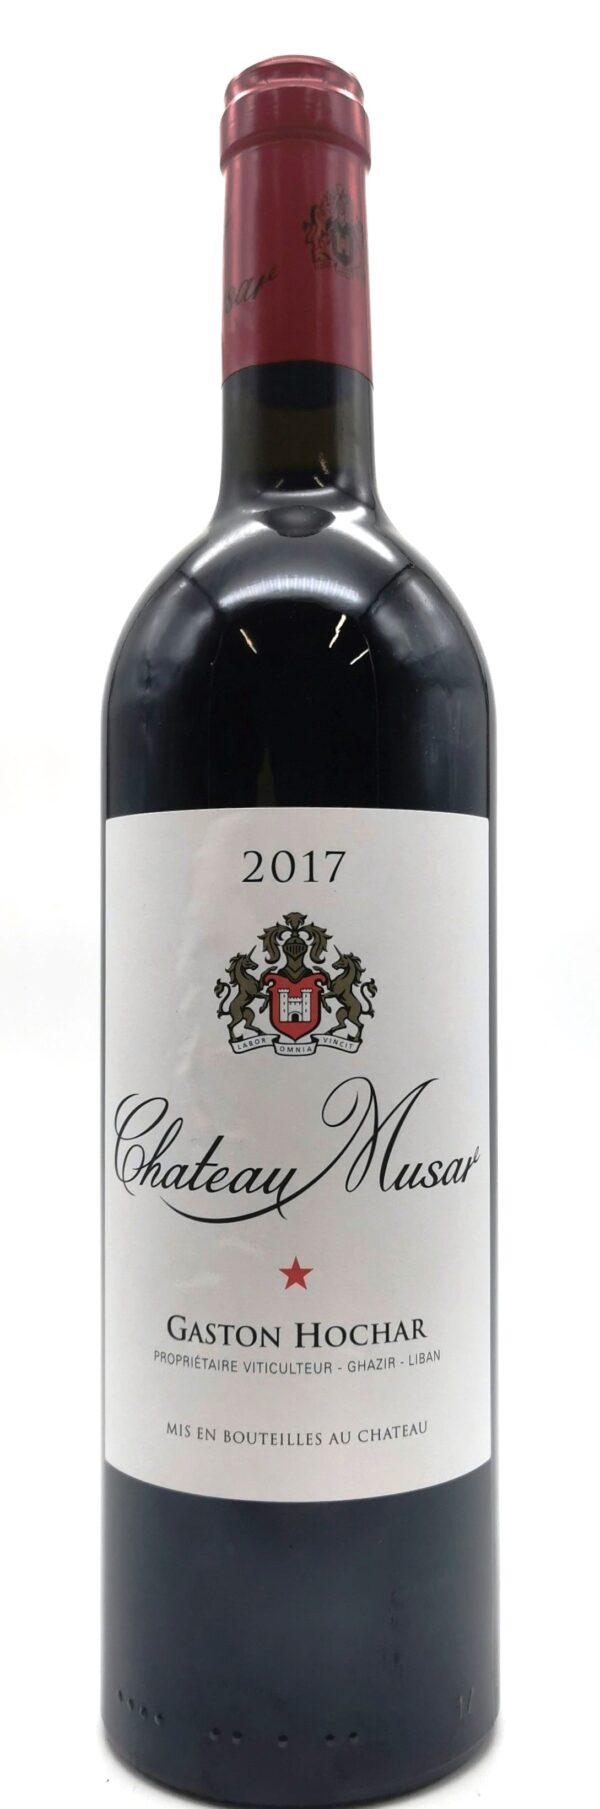 CHATEAU MUSAR 2017